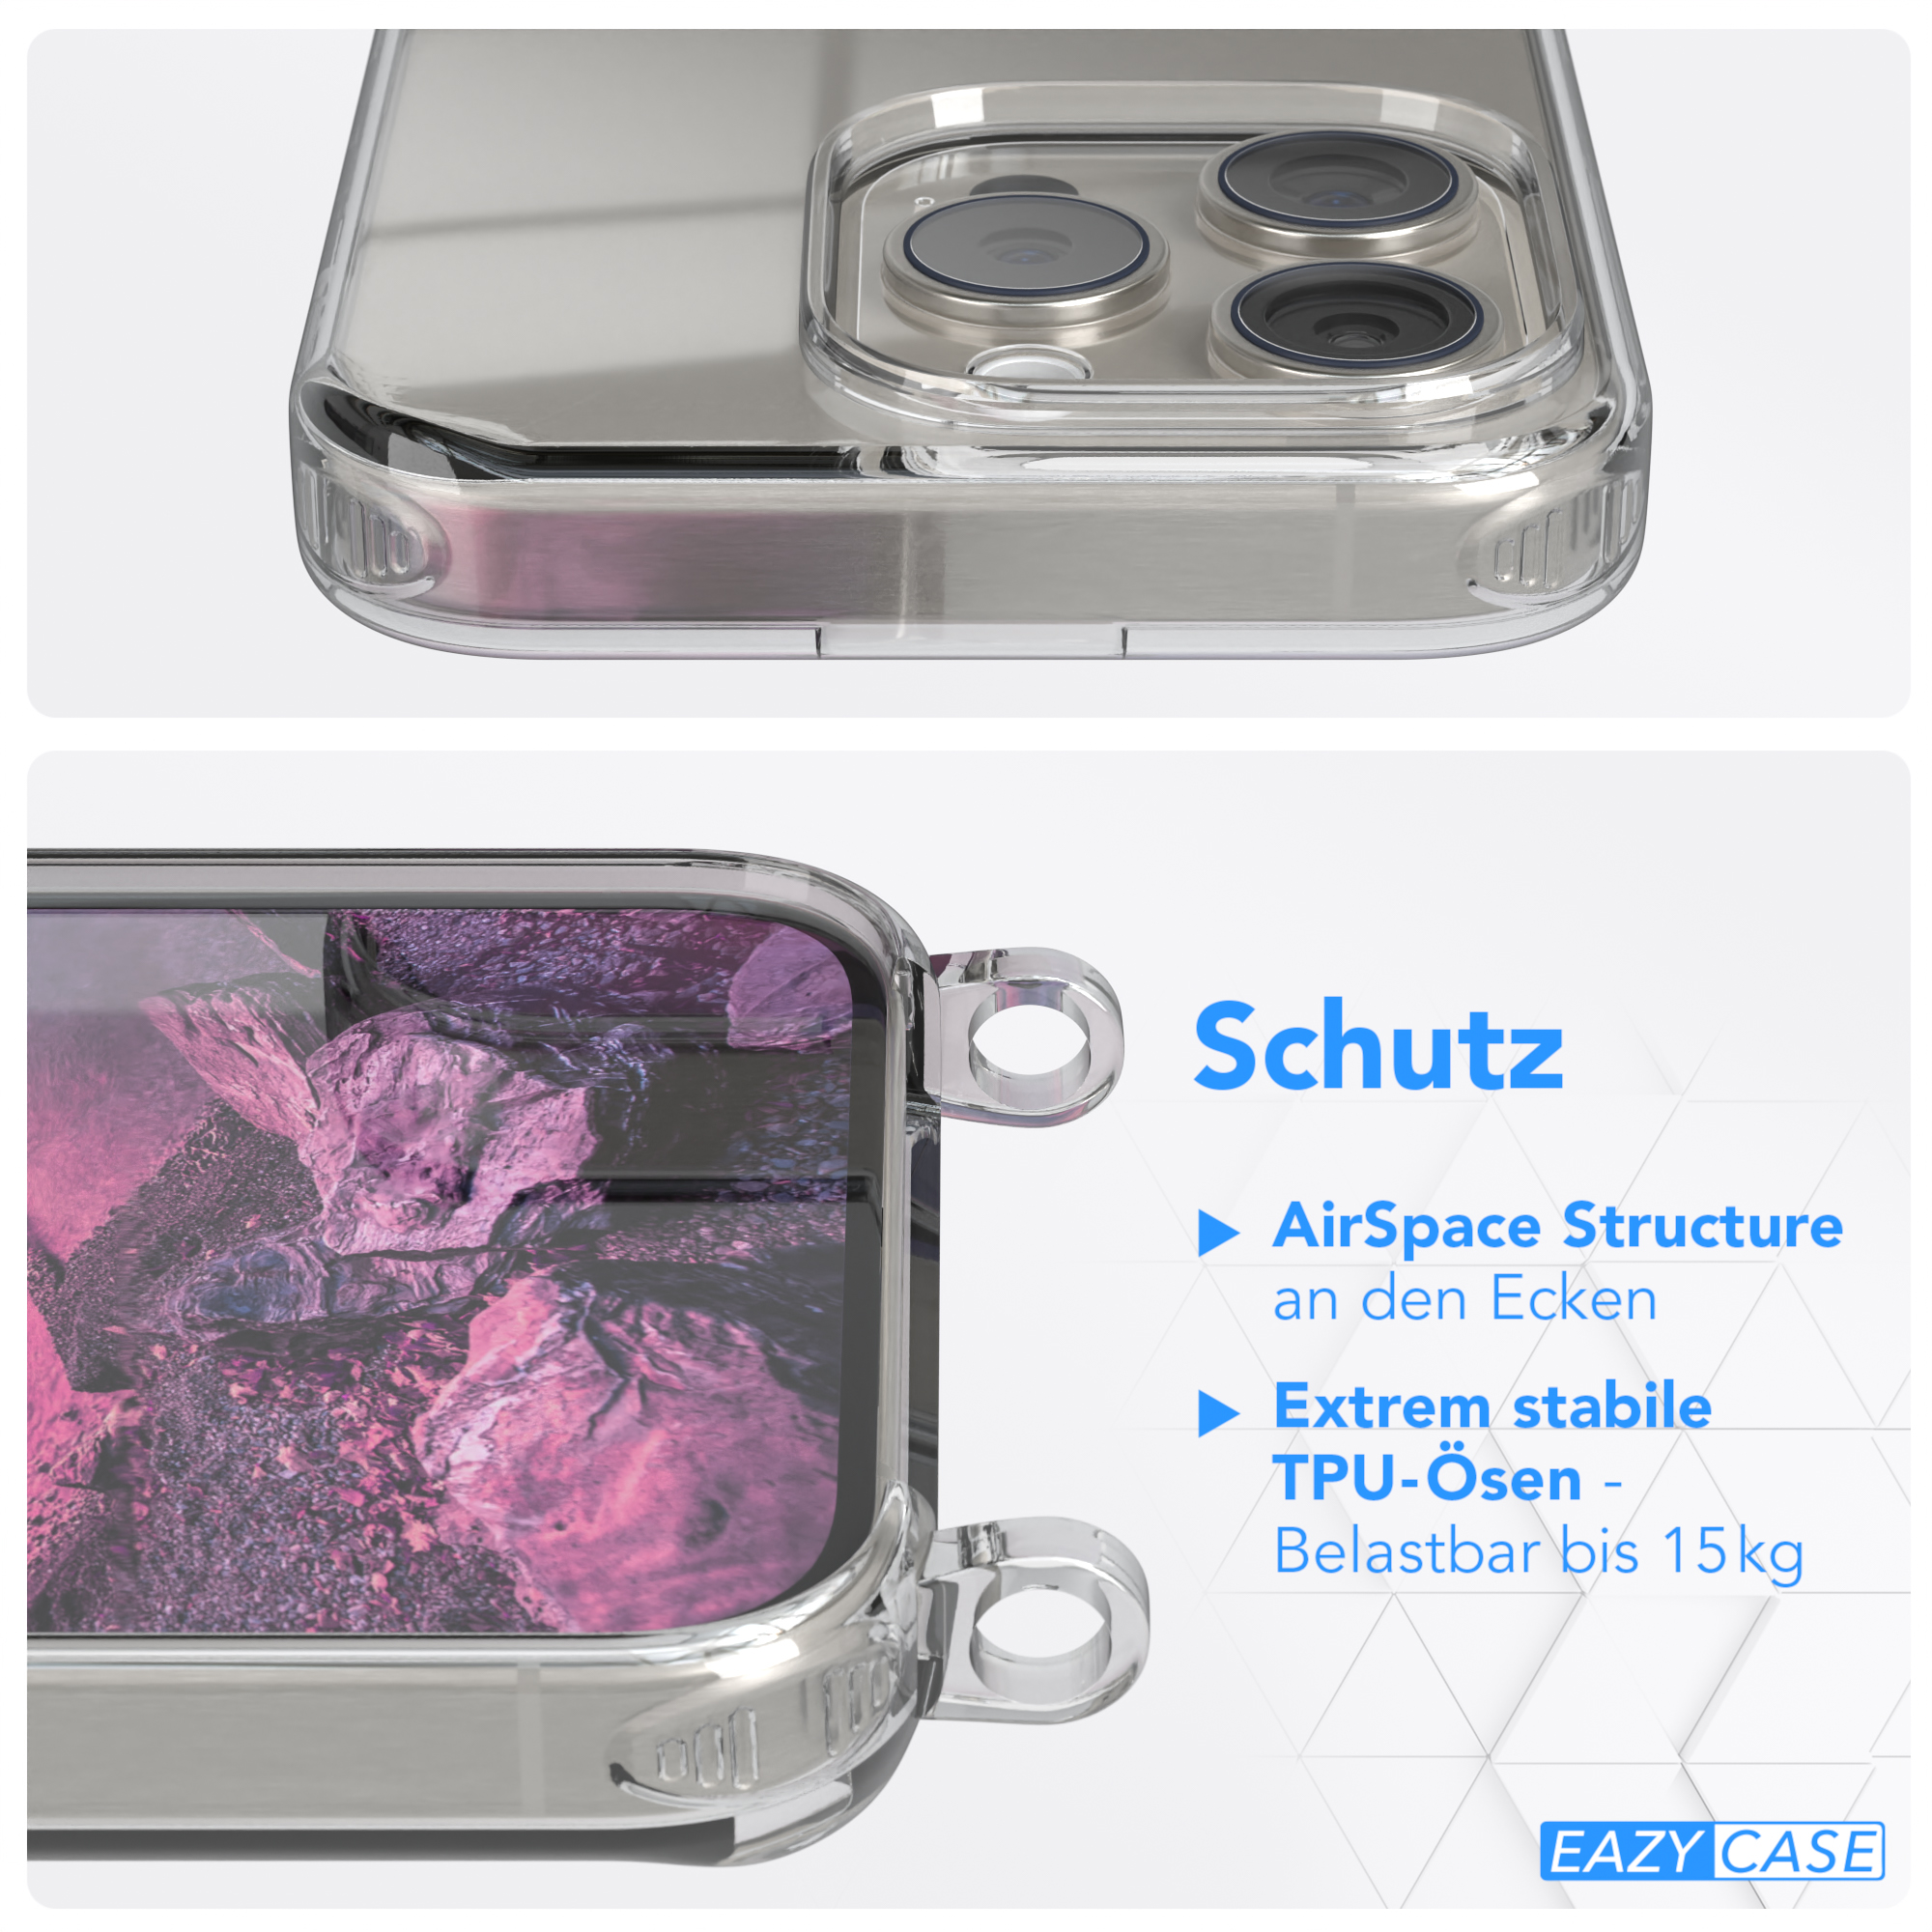 15 / Pro, iPhone Apple, Silber mit Clips CASE Cover EAZY Clear Umhängetasche, Umhängeband, Lila